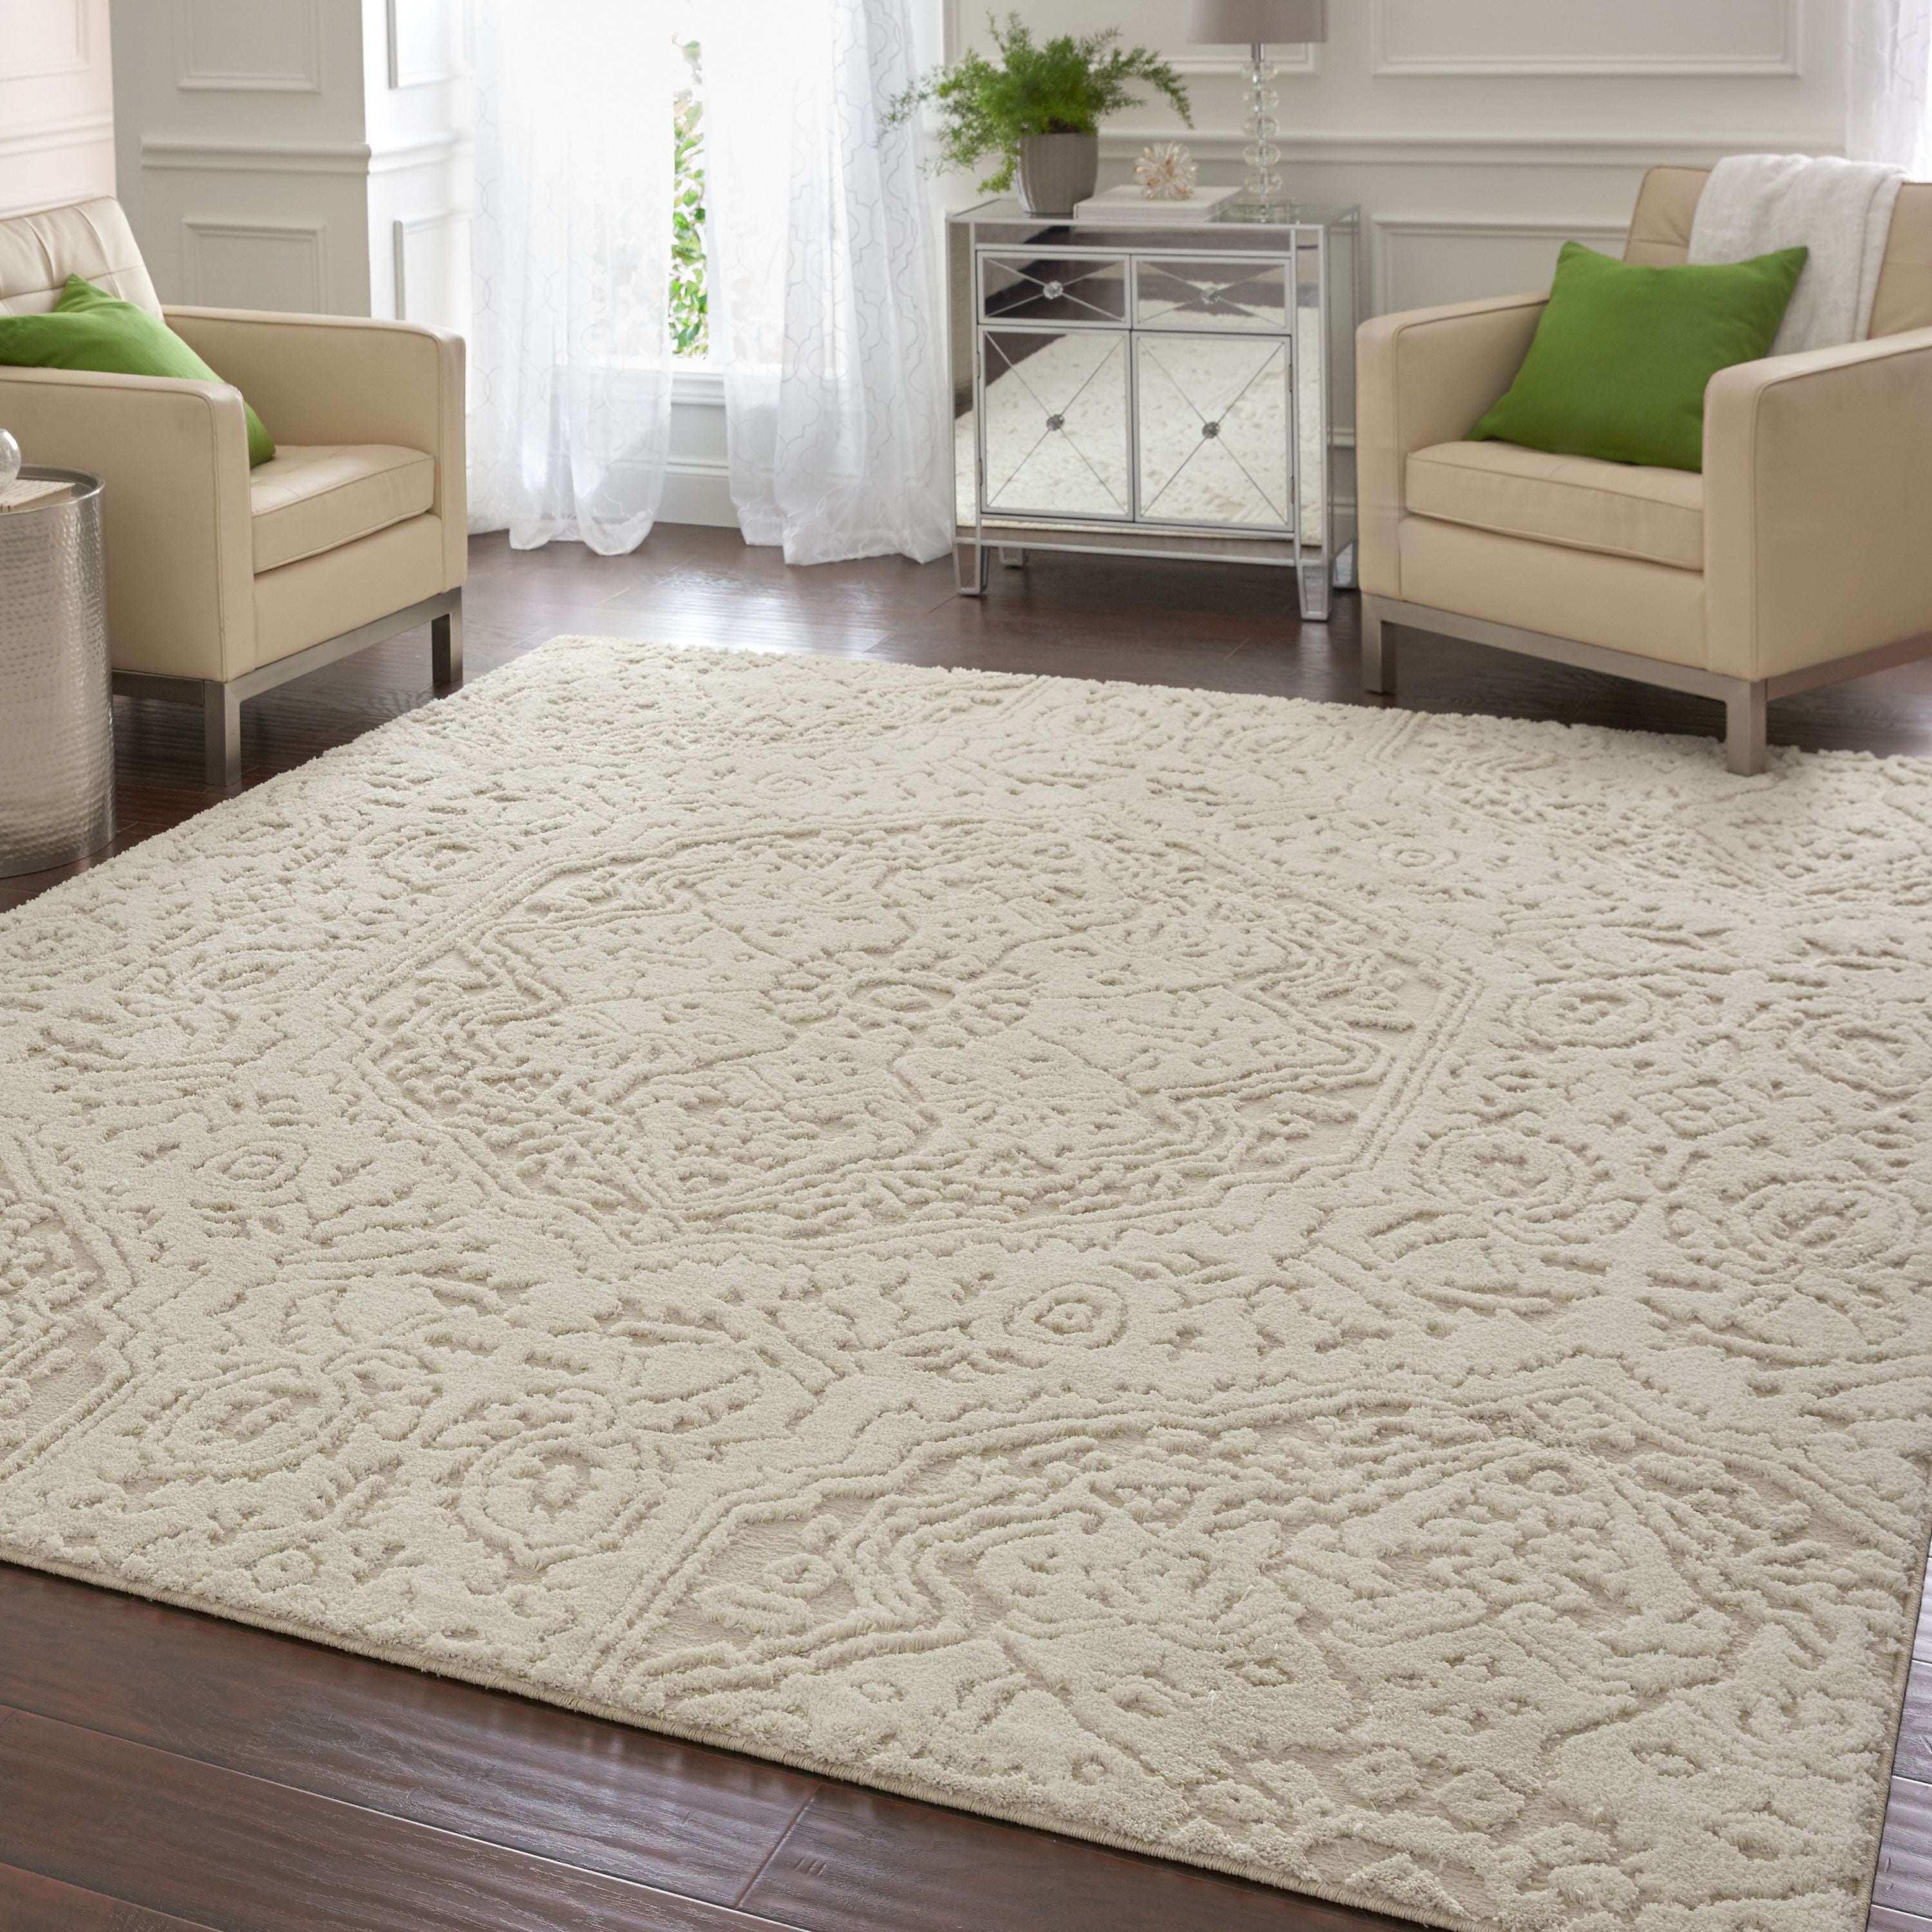 Mohawk Home Loft Collection Medallion, Mohawk Throw Rugs With Rubber Backing